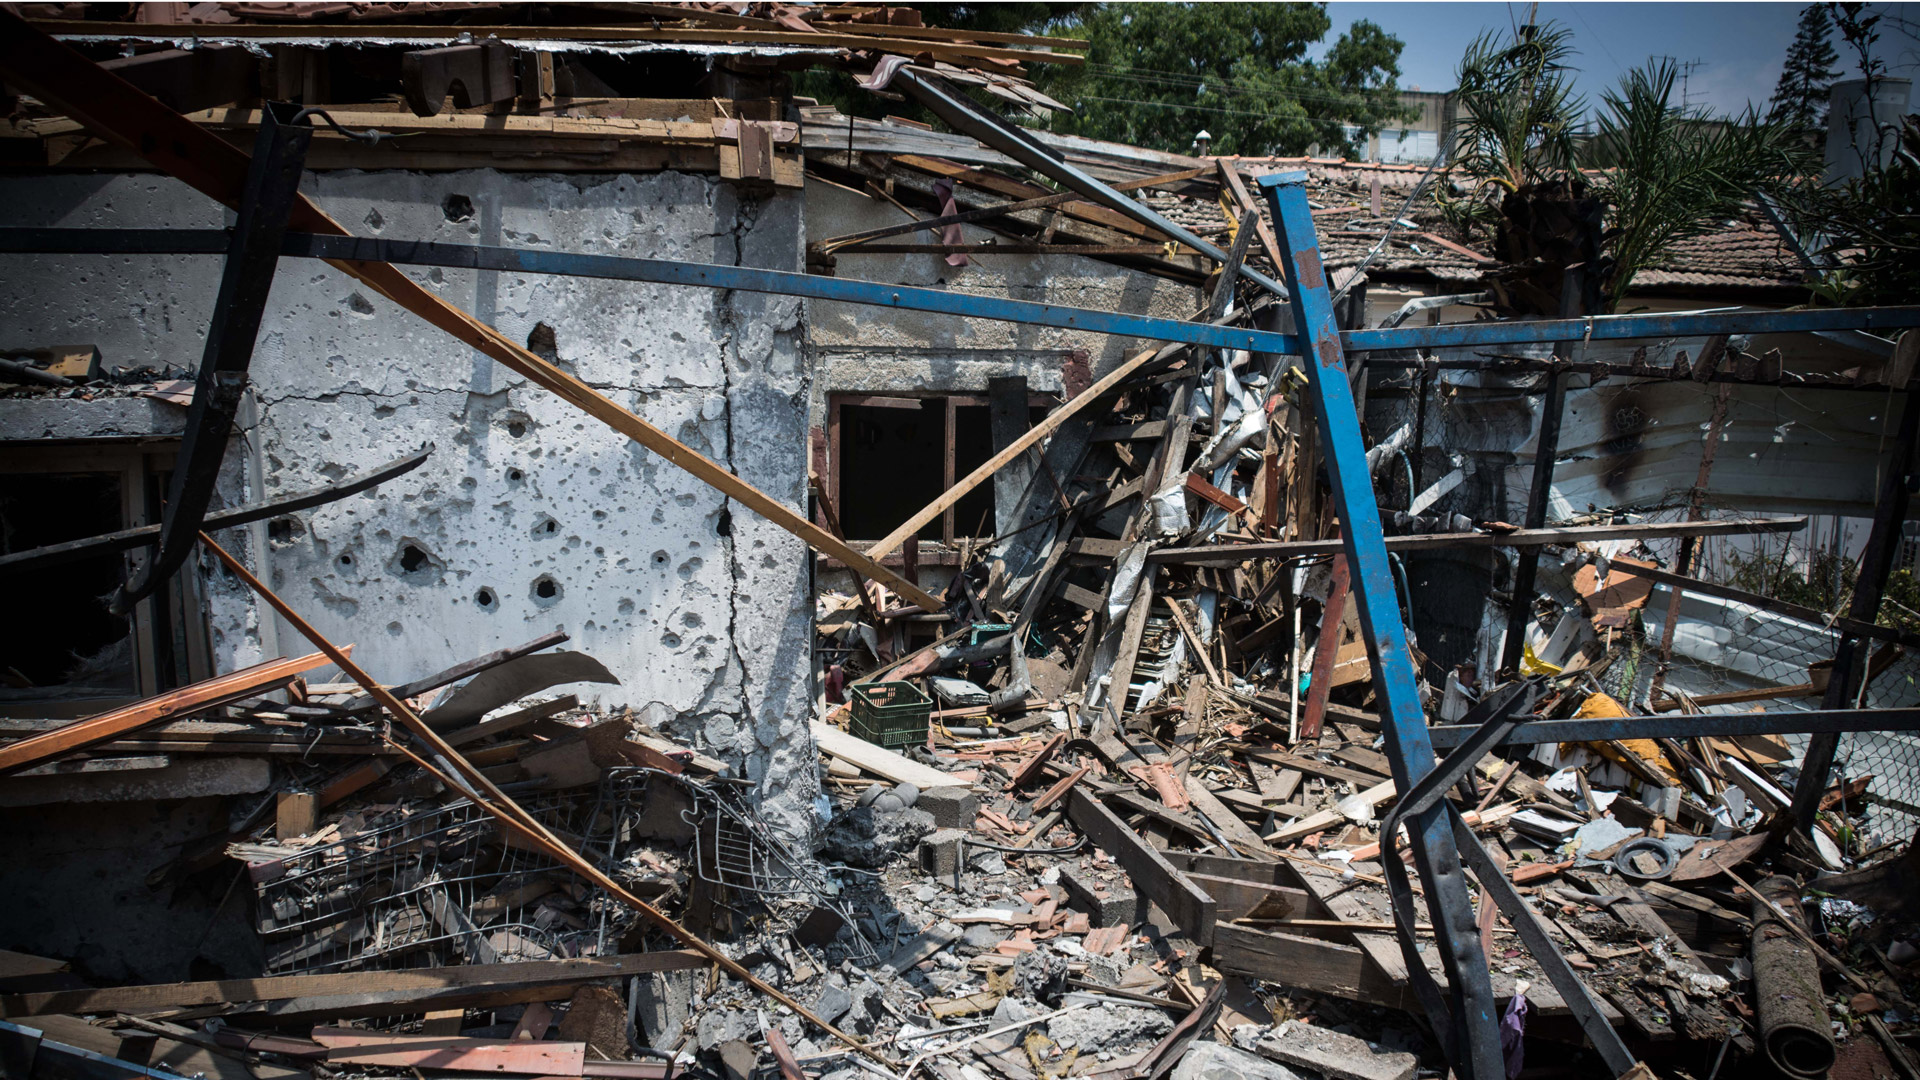 A house in Yehud, in central Israel, destroyed by a Hamas-launched rocket in 2014